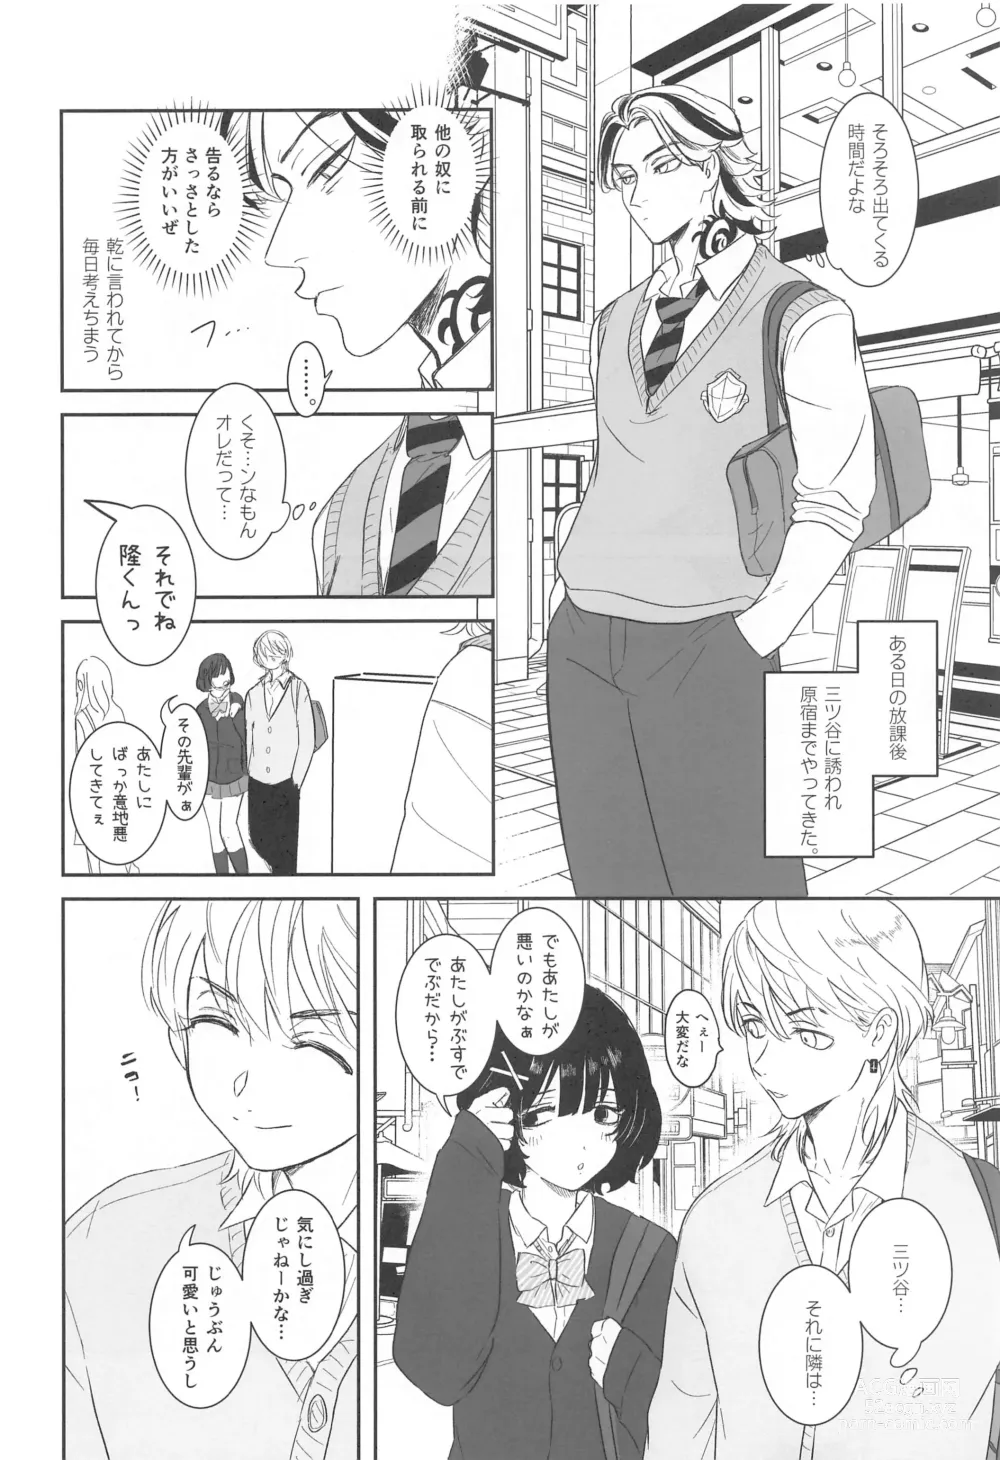 Page 7 of doujinshi Houkago Lesson